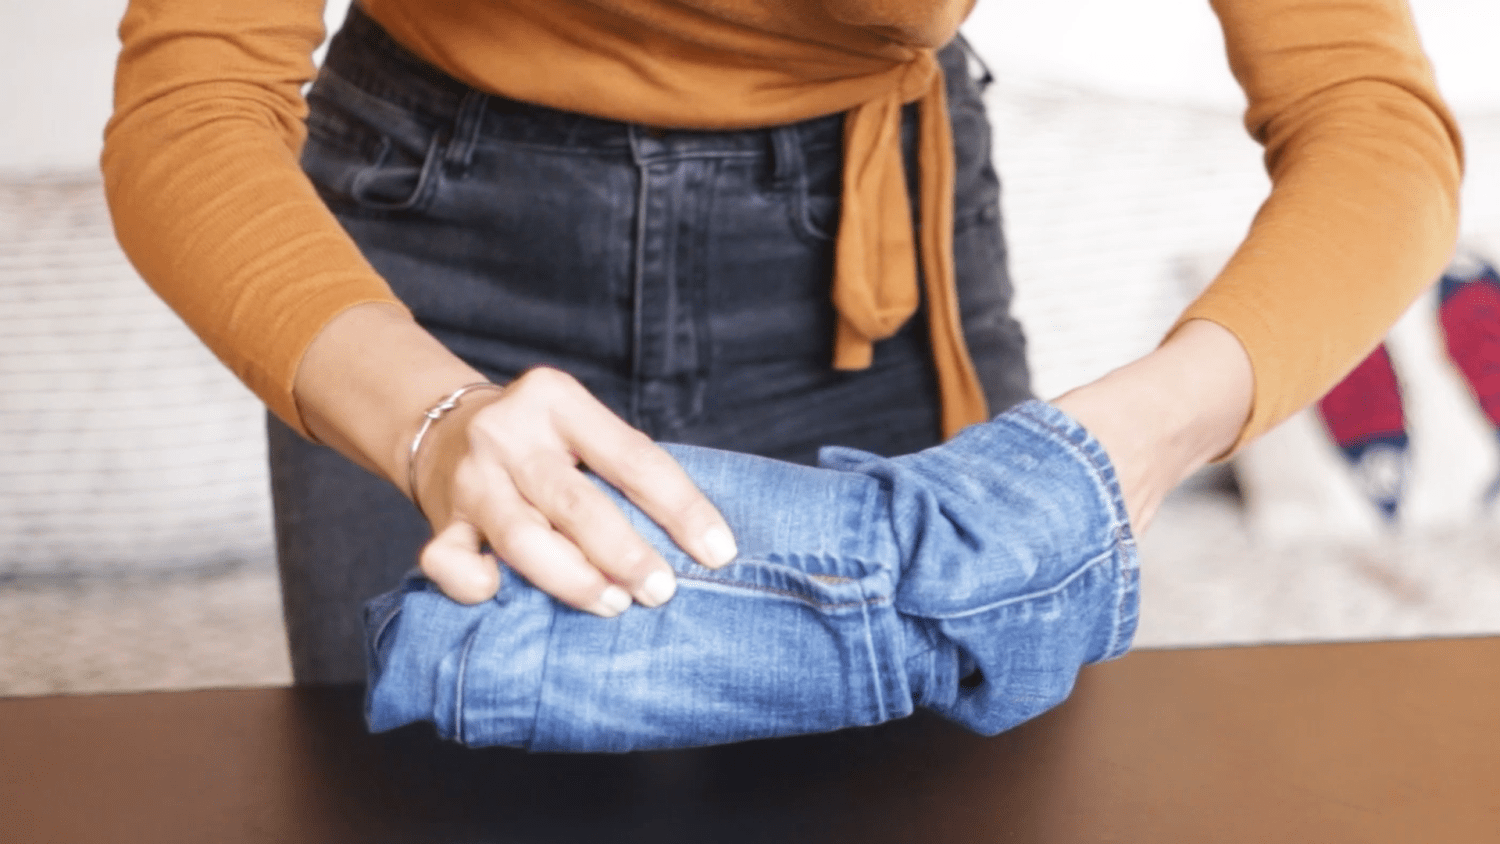 Woman reveals genius tip for tightening your jeans without a belt